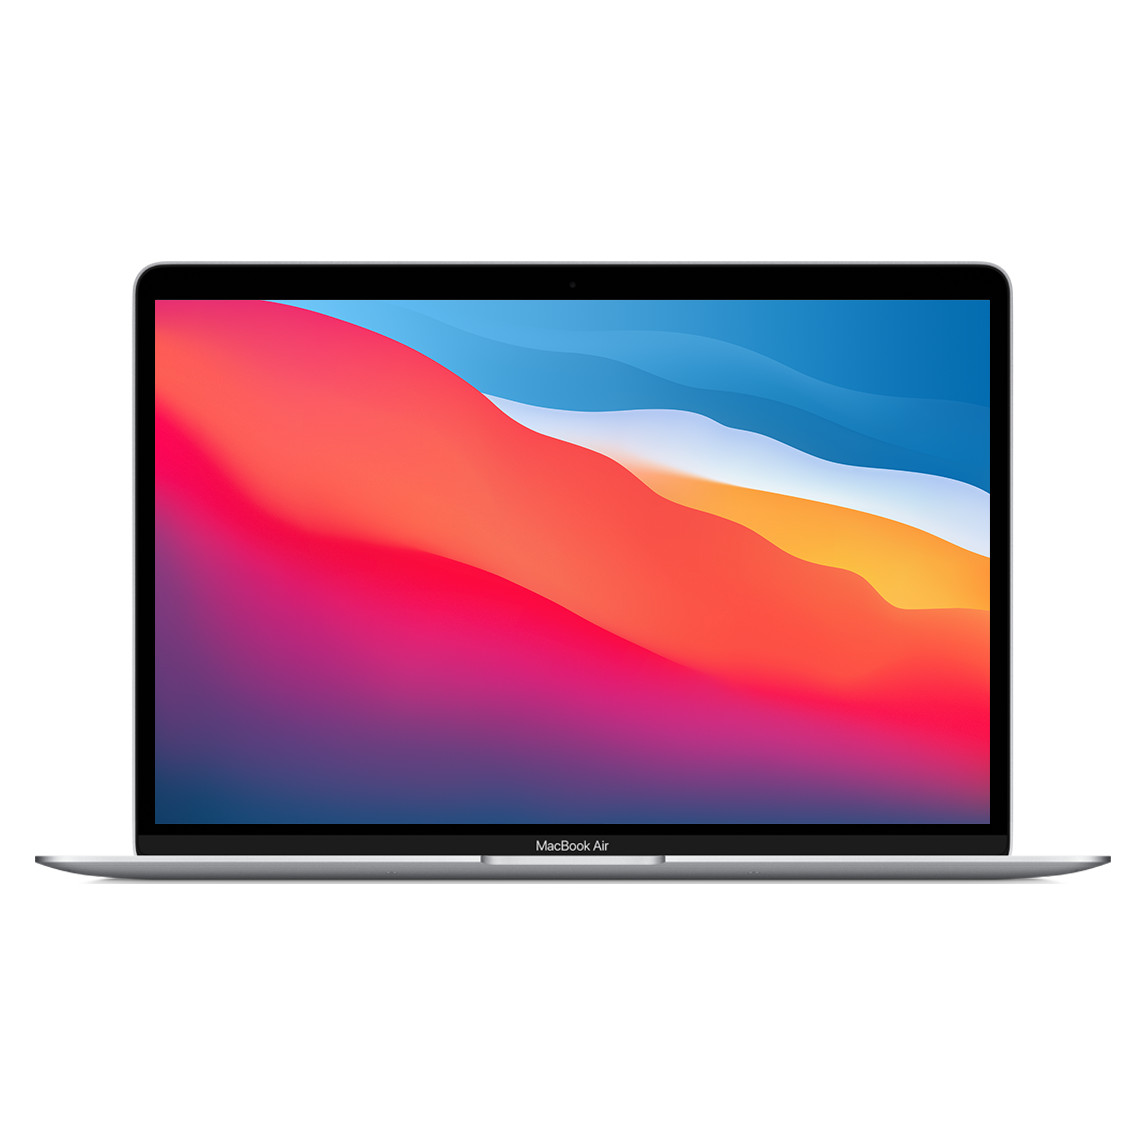 13.3-inch MacBook Air, silver, open, thin bezel, FaceTime HD camera, curved edges